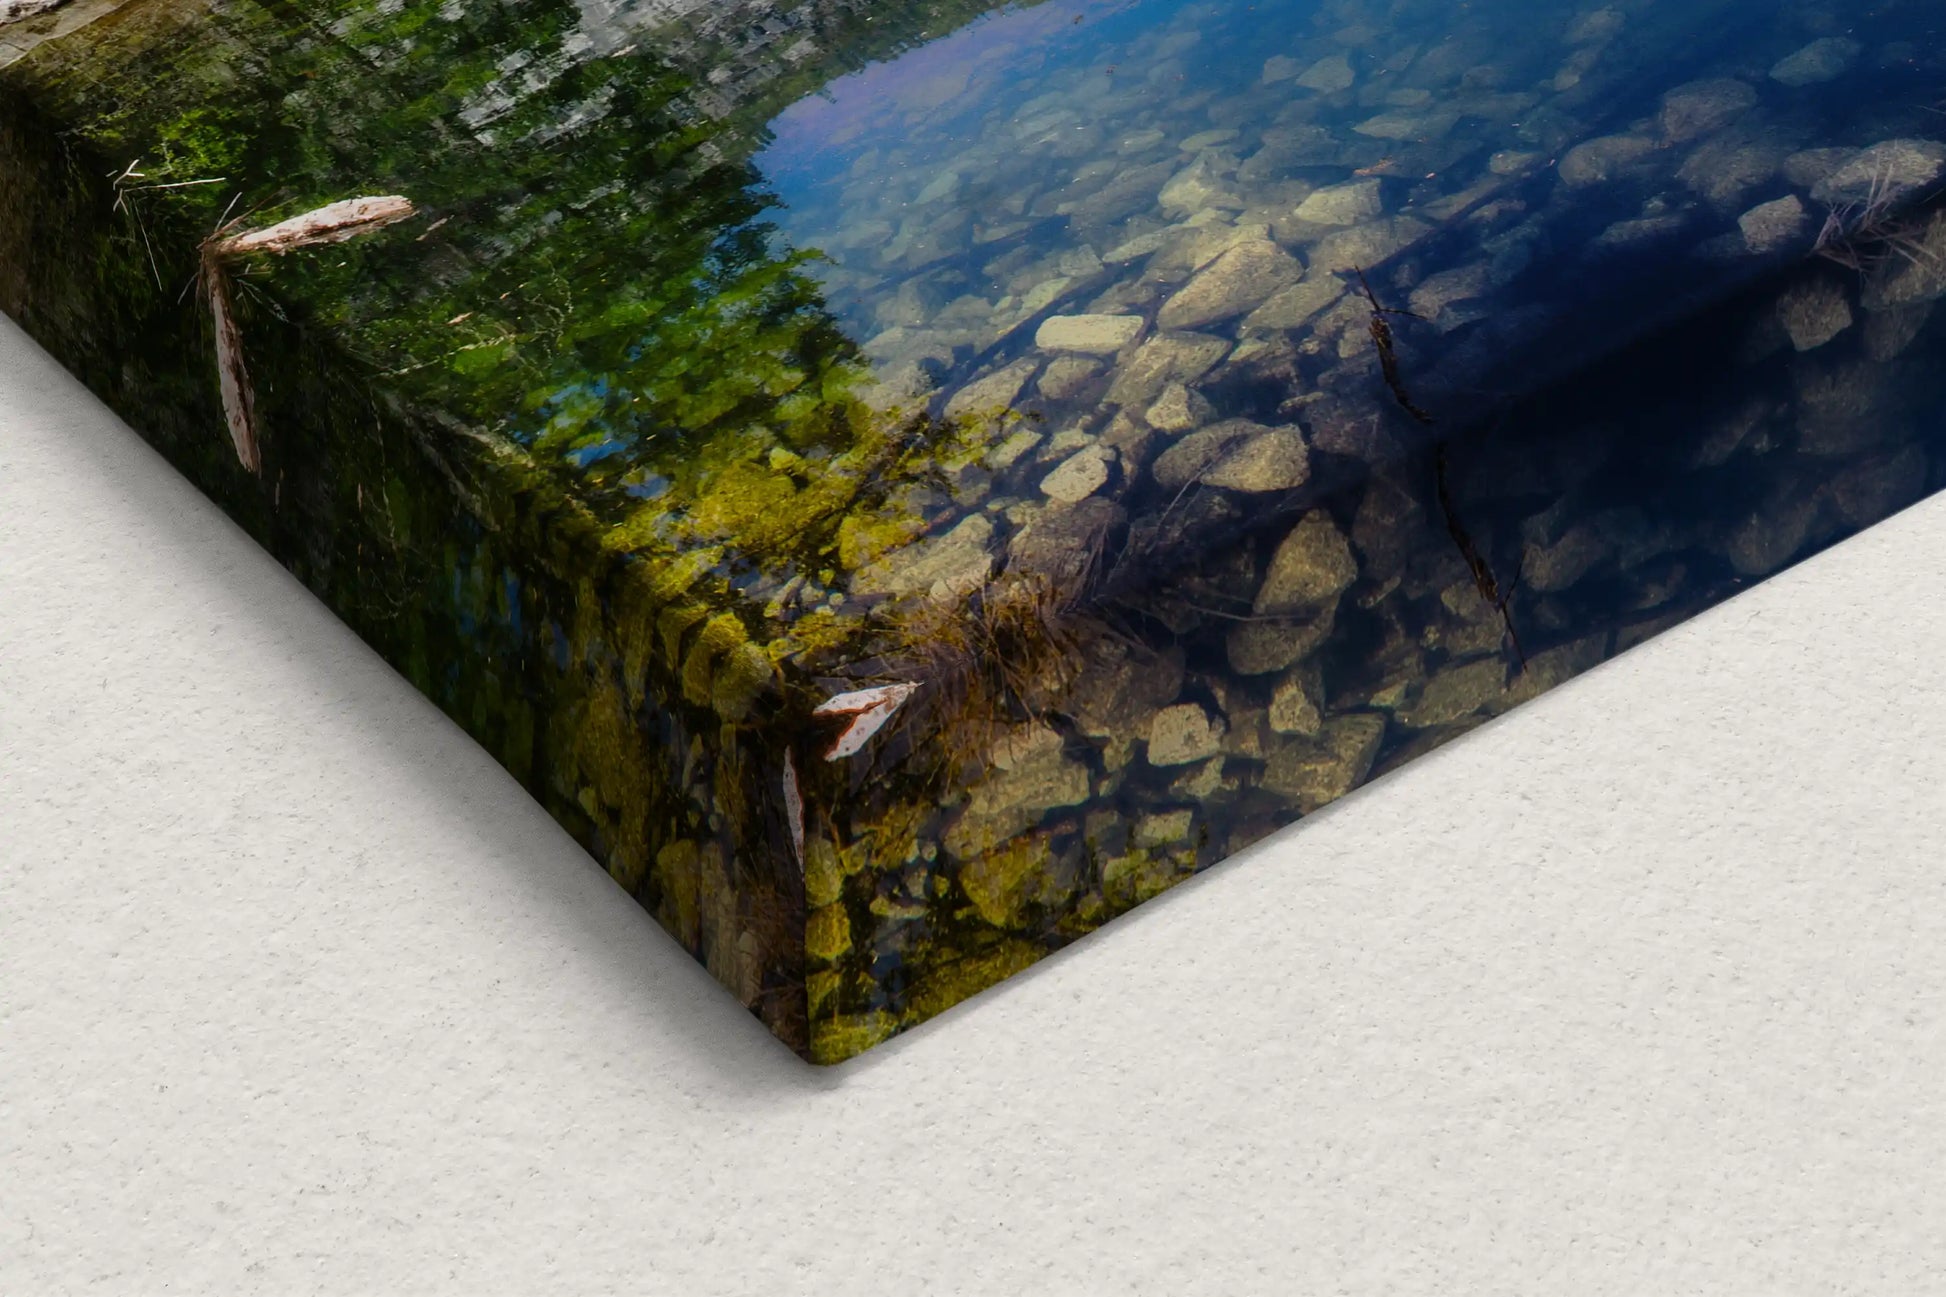 Canvas corner close-up showcasing the print quality and depth of the Mt. Watkins and Mirror Lake image.